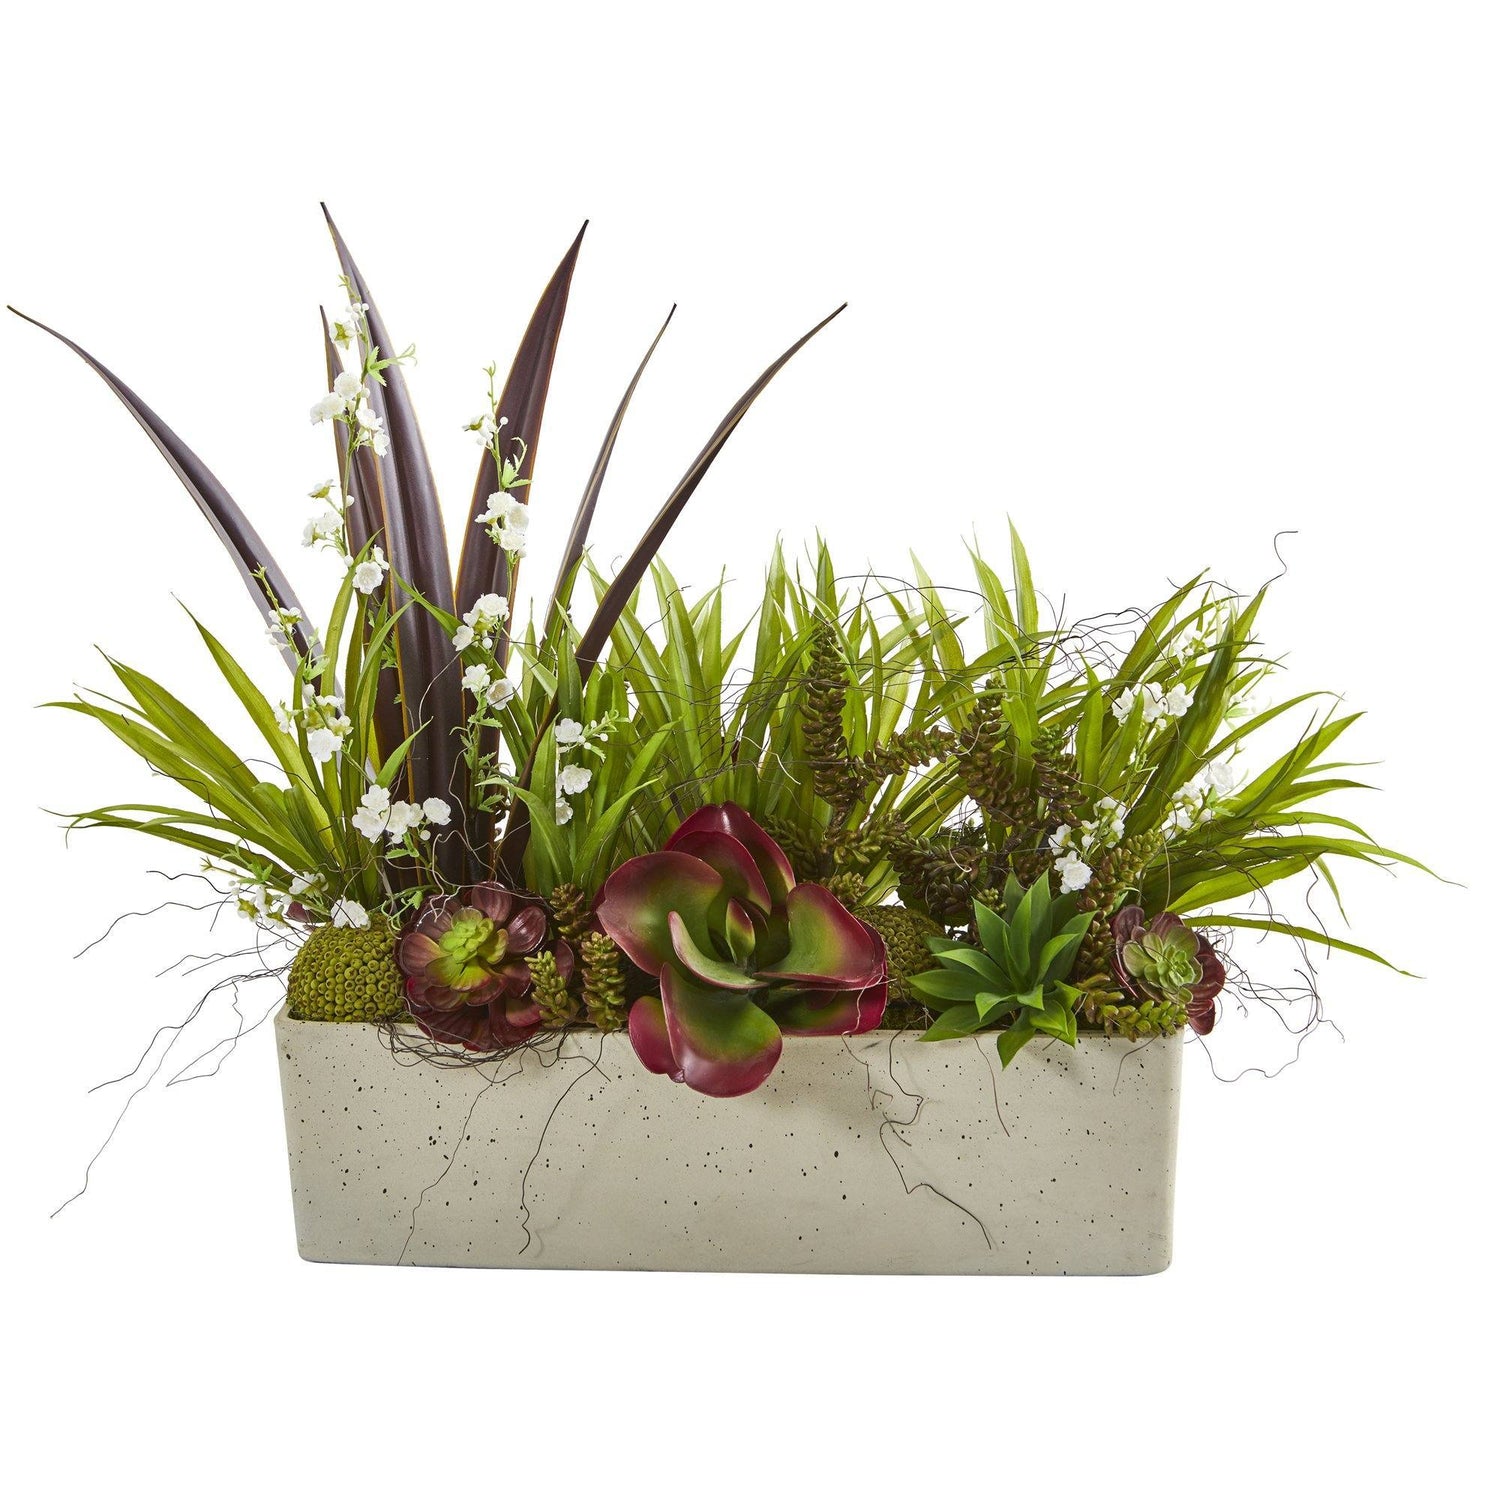 32” Mixed Succulent and Grass Garden Artificial Plant in White Planter